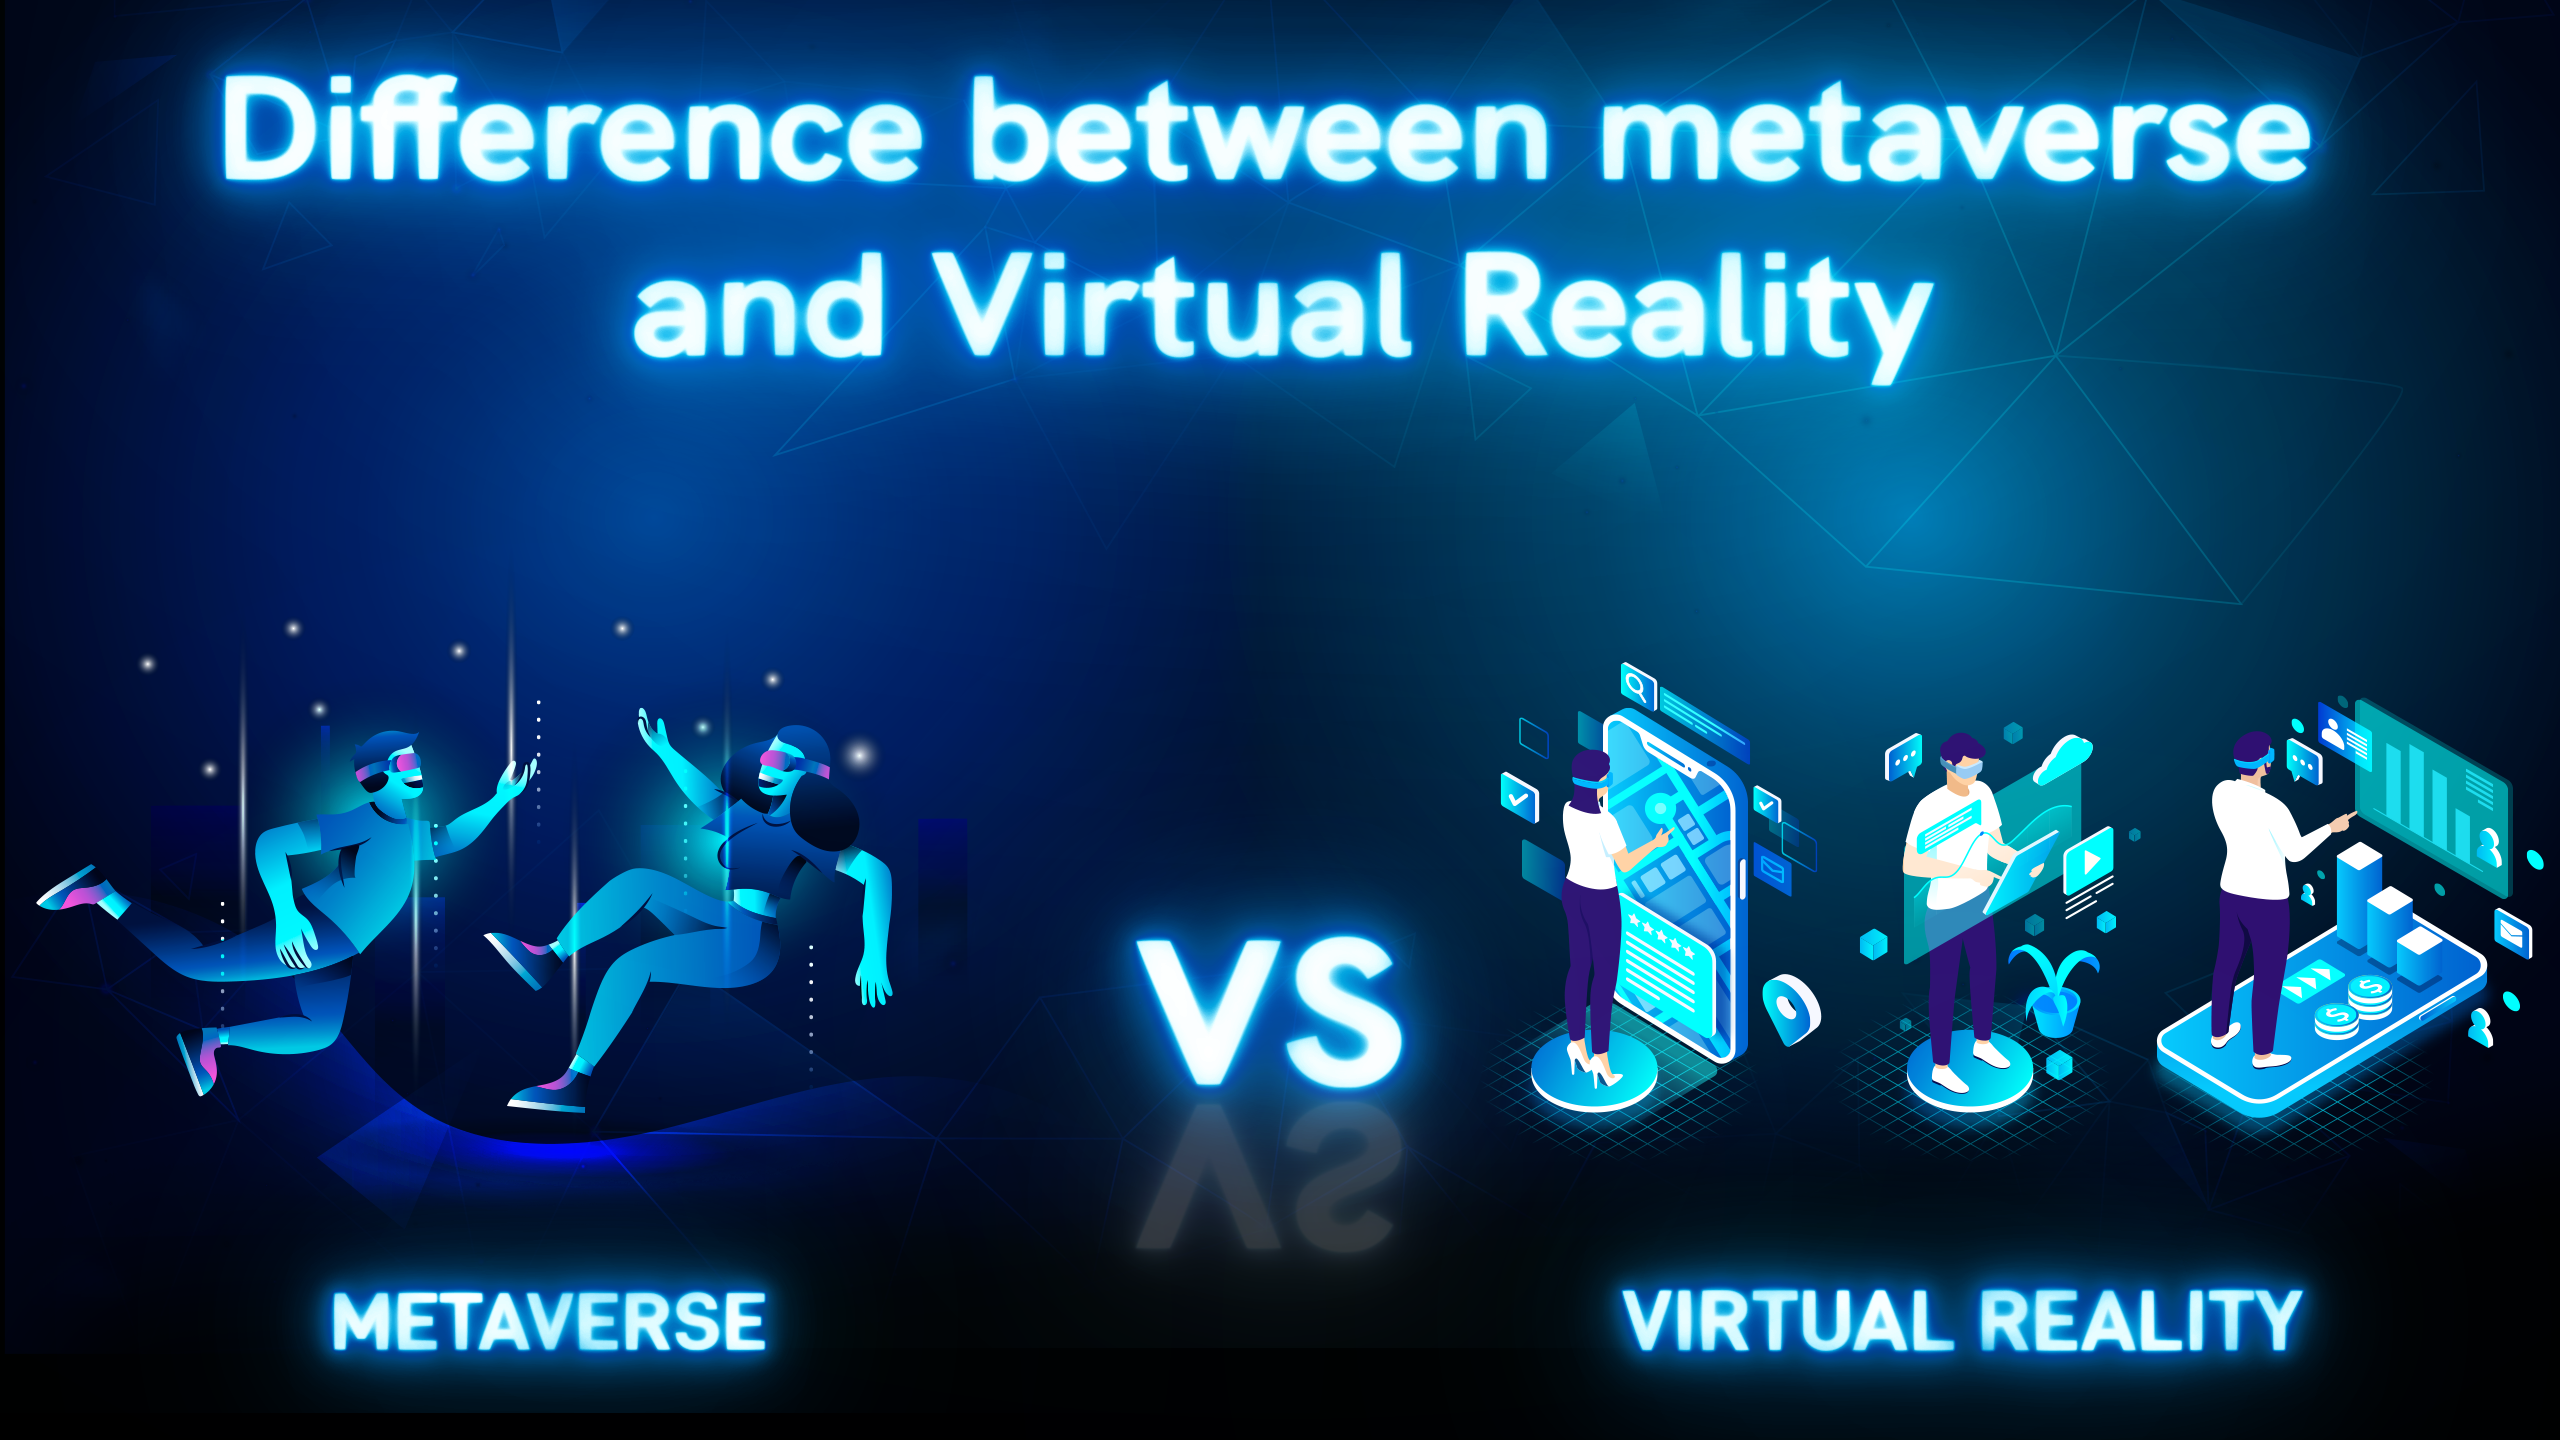 How Does the Metaverse Relate to Virtual Reality?